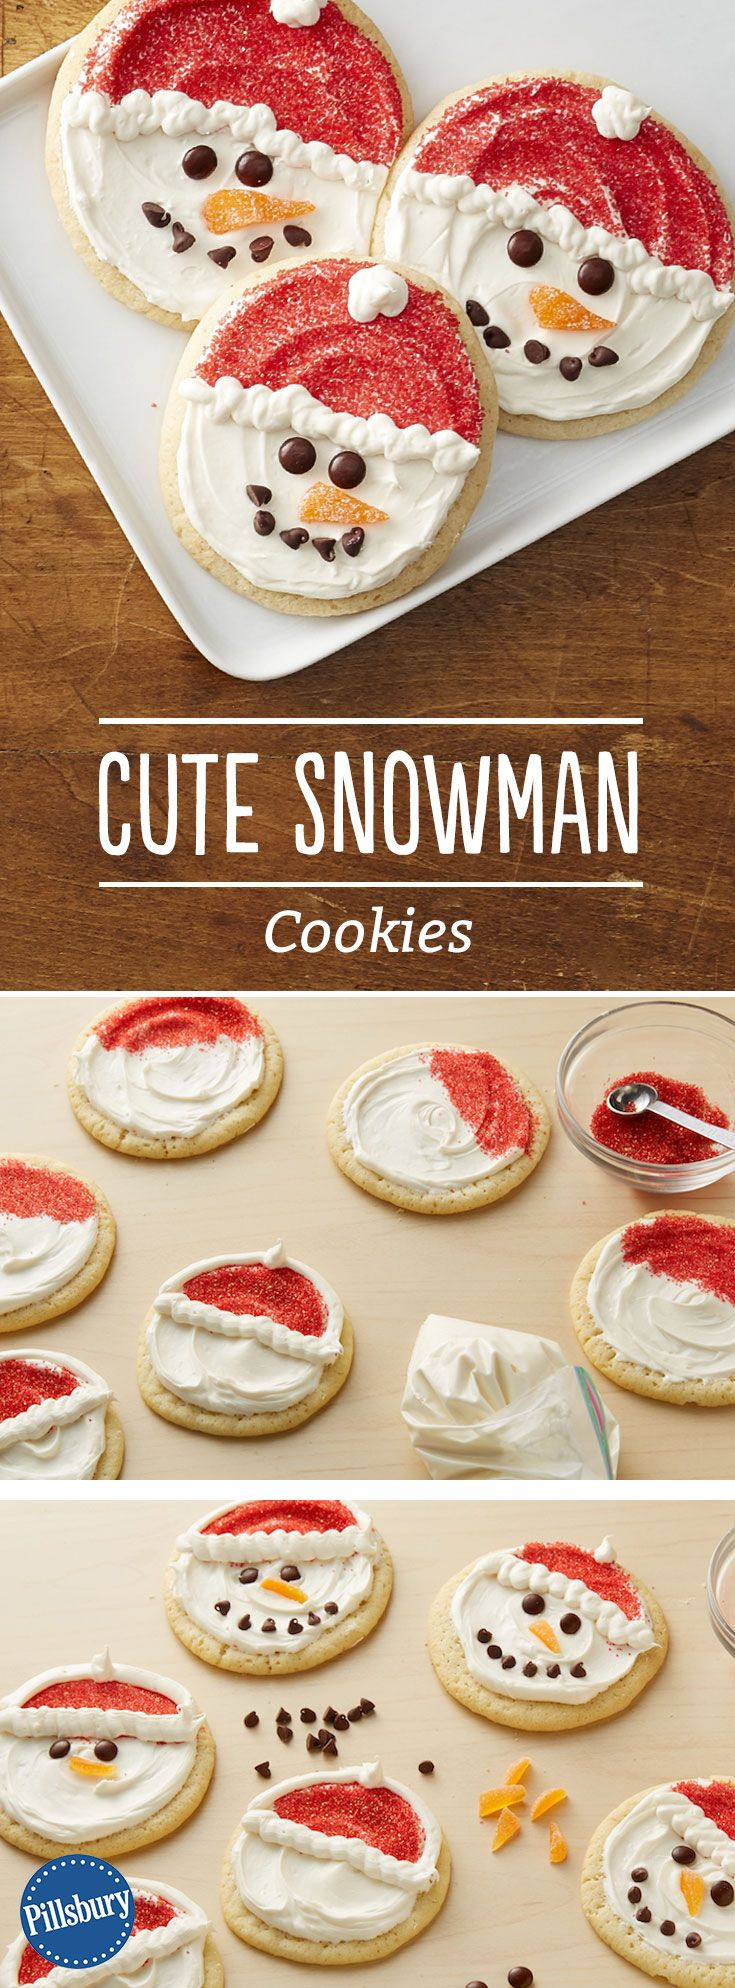 Kid Friendly Christmas Cookies
 1000 ideas about Snowman Cookies on Pinterest